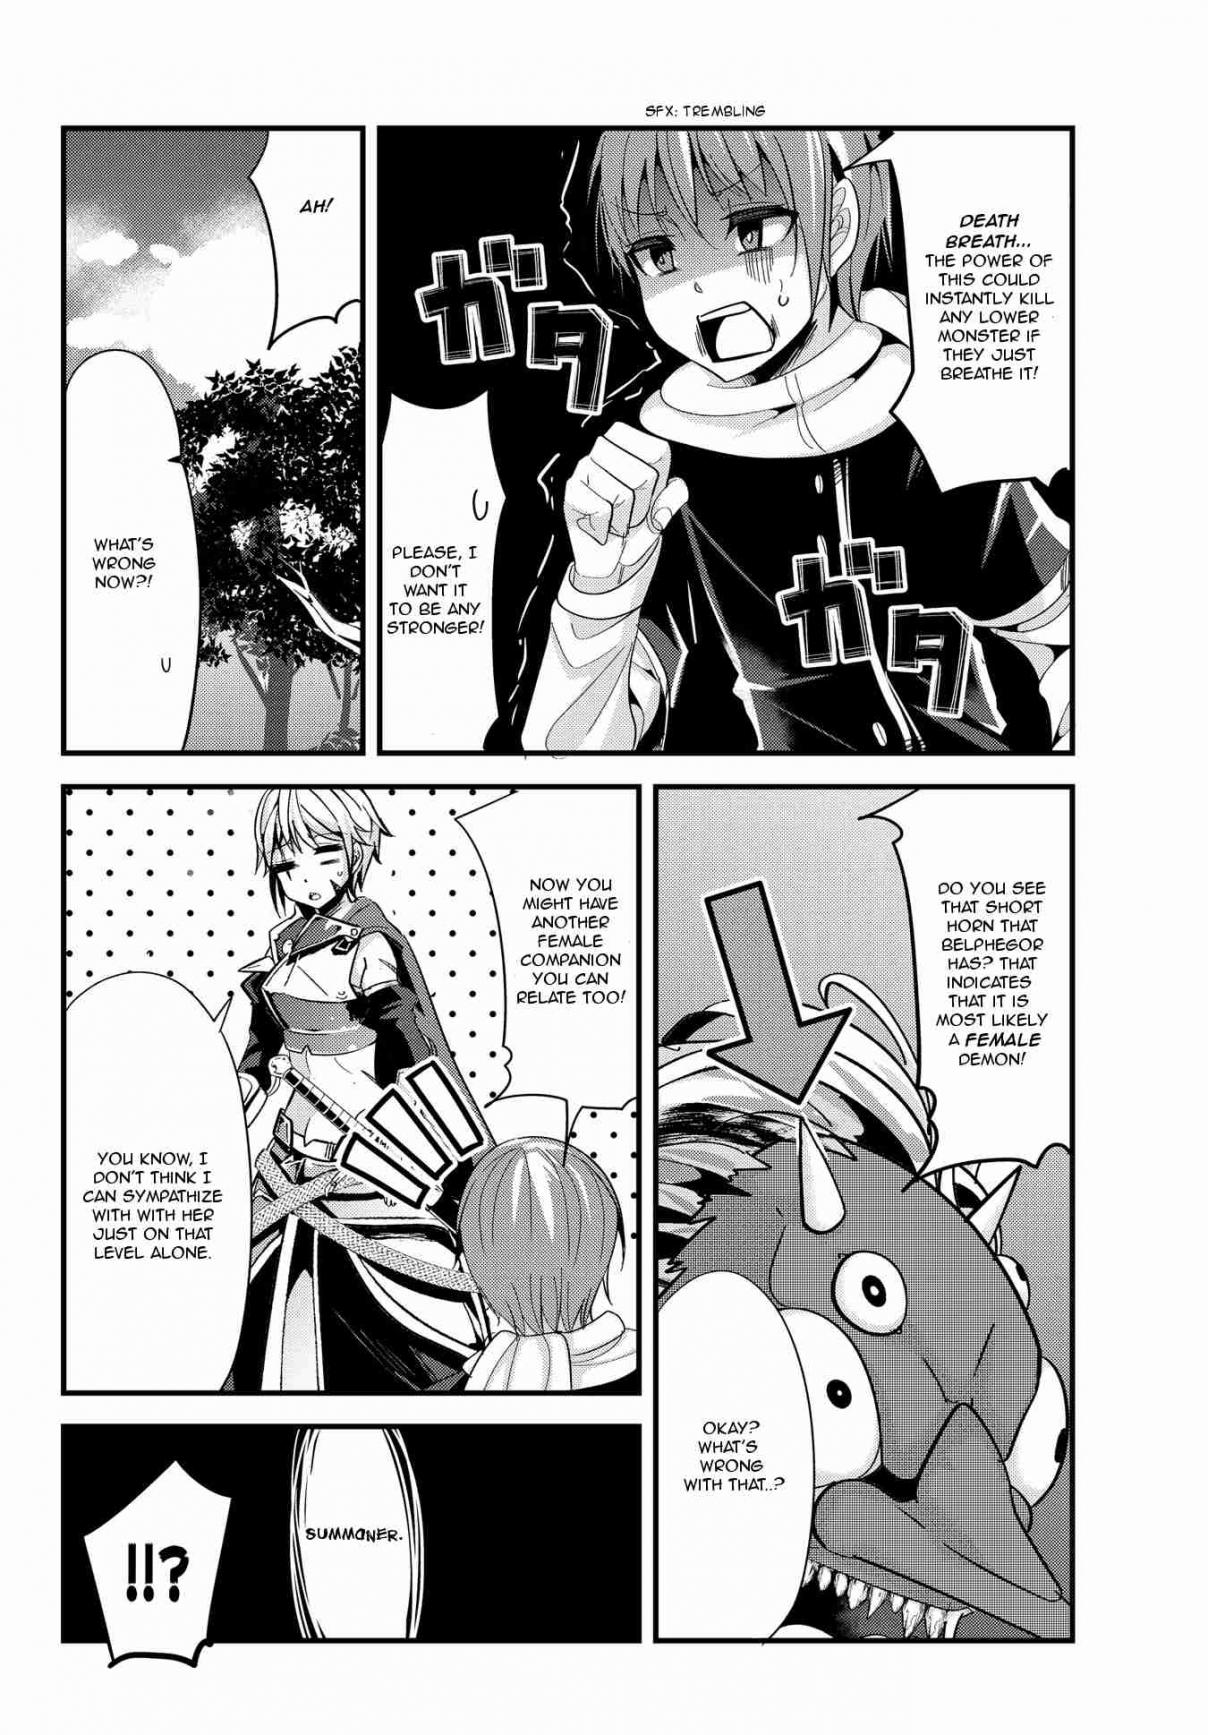 A Story About Treating a Female Knight, Who Has Never Been Treated as a Woman, as a Woman Ch. 53 The Female Knight and a Belphegor